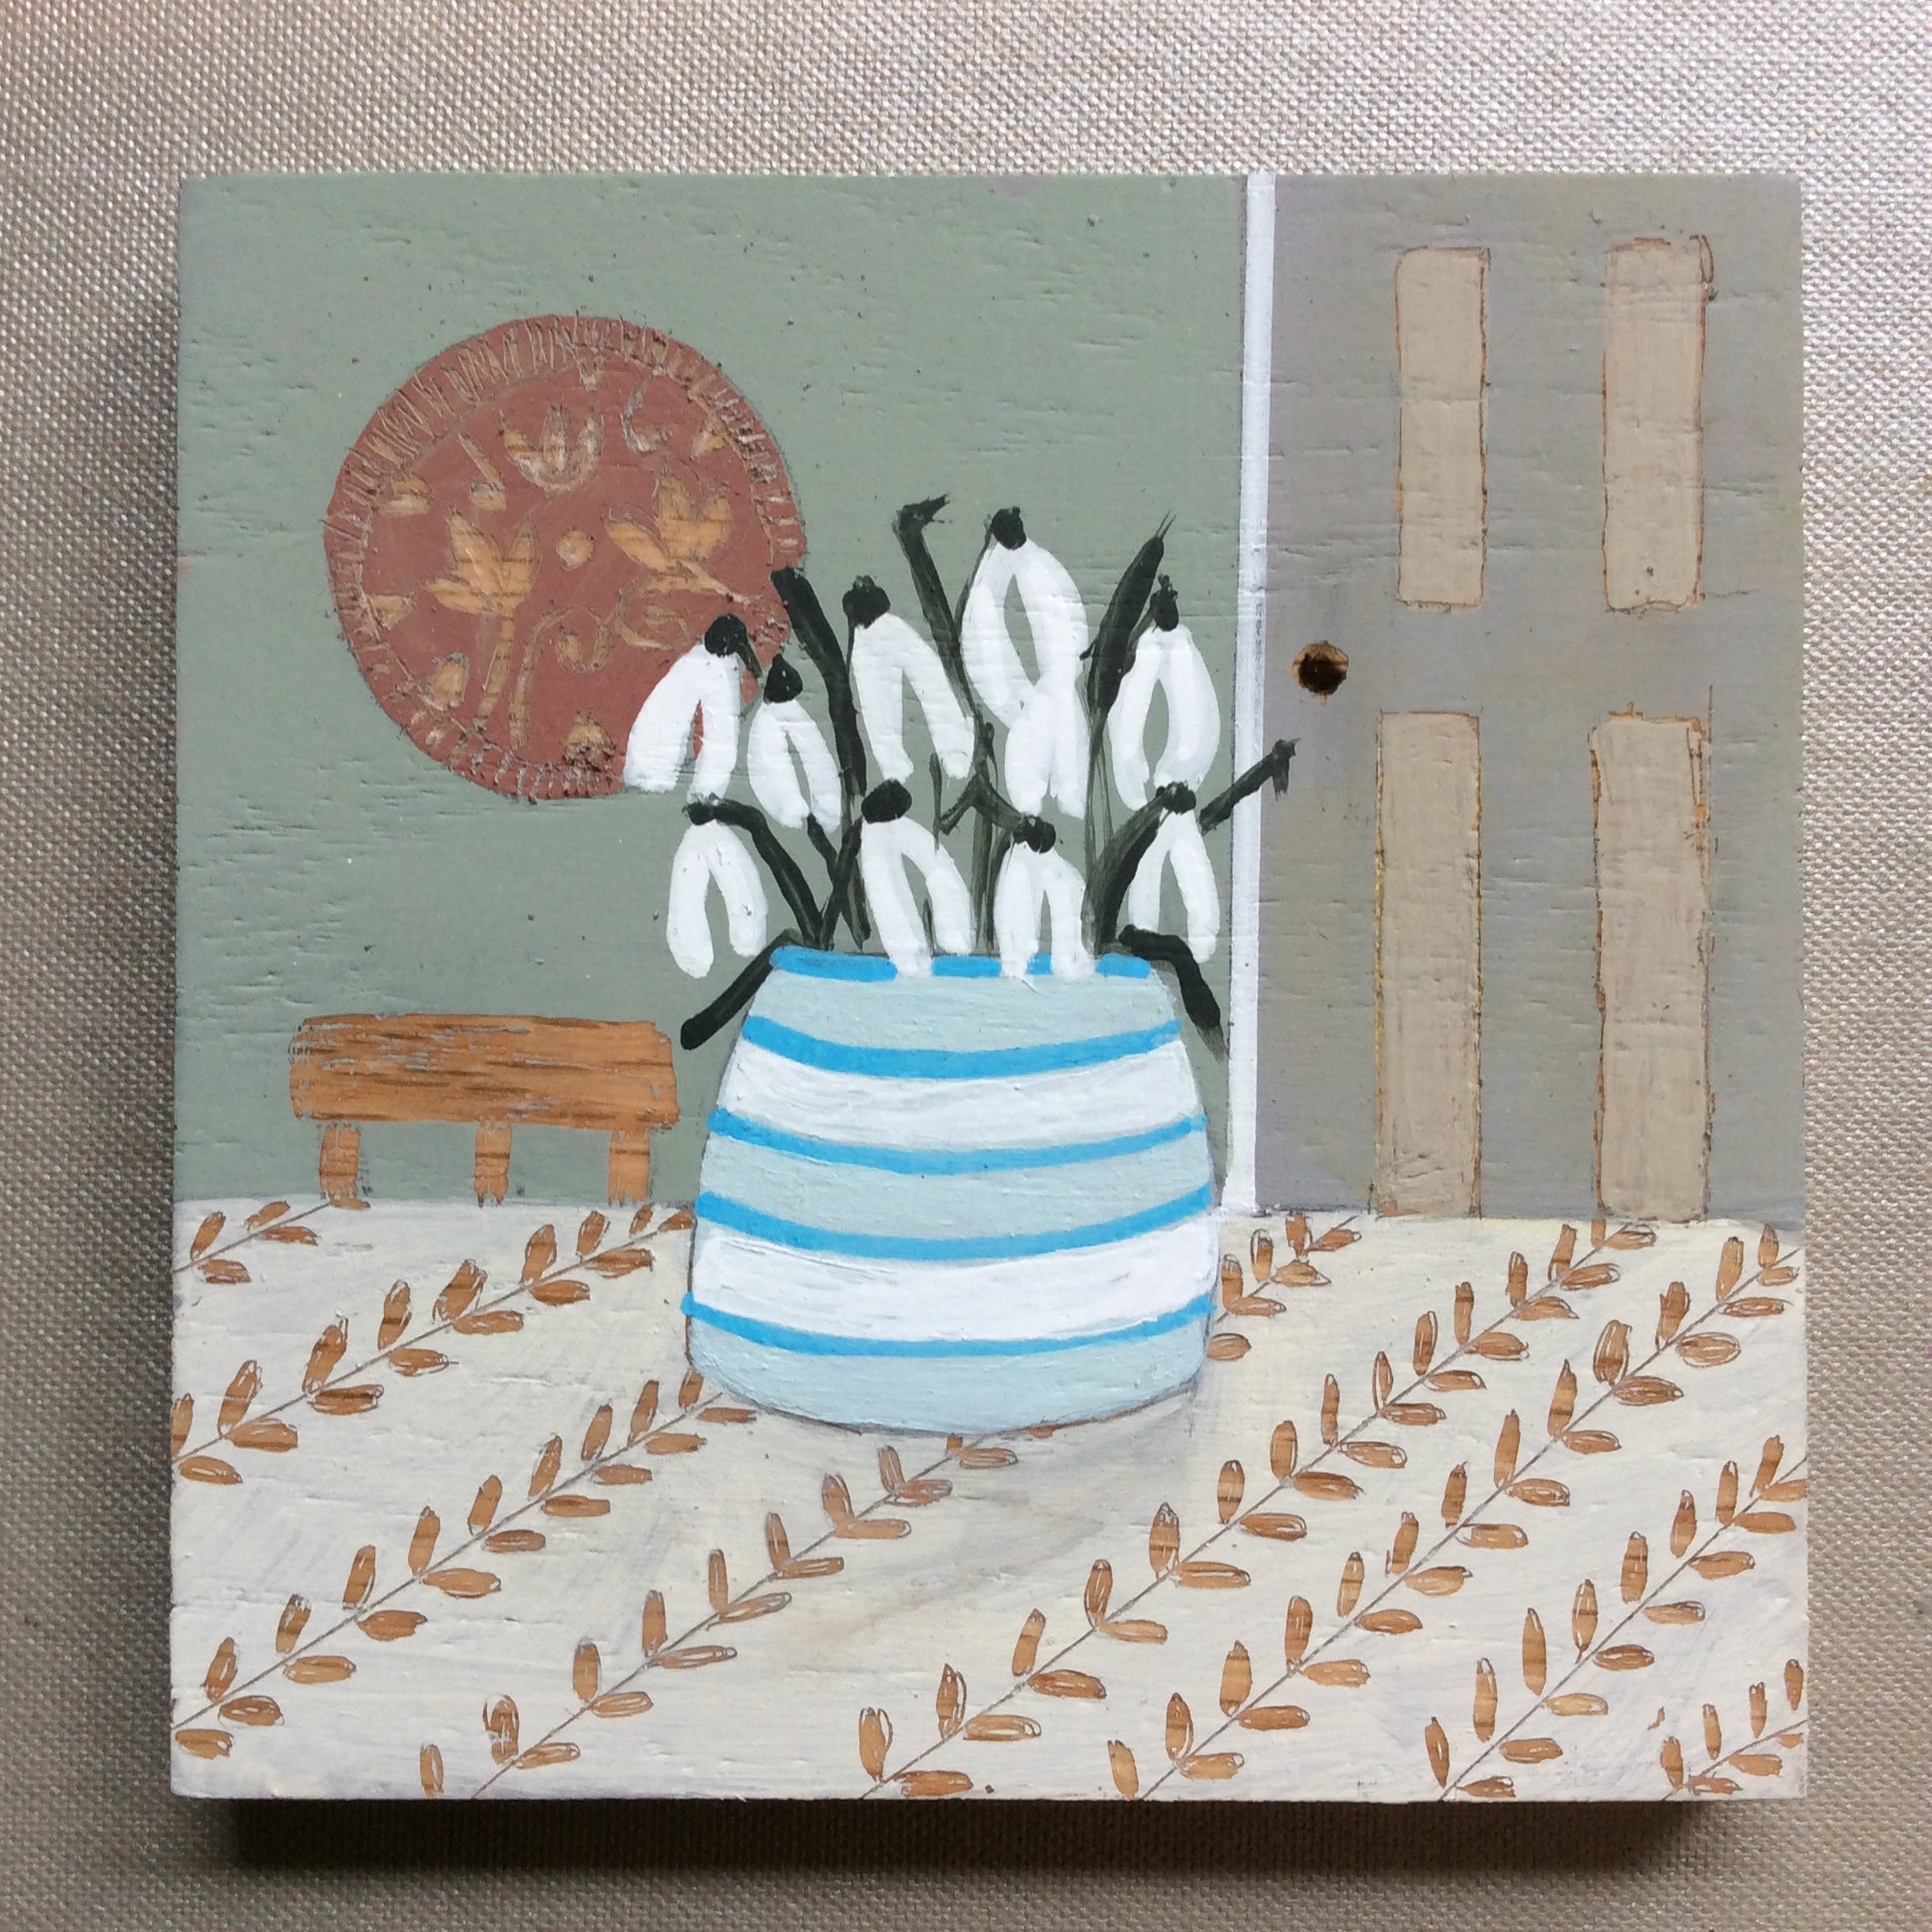 Mixed Media art on wood By Louise O’Hara “Snowdrops in the kitchen”